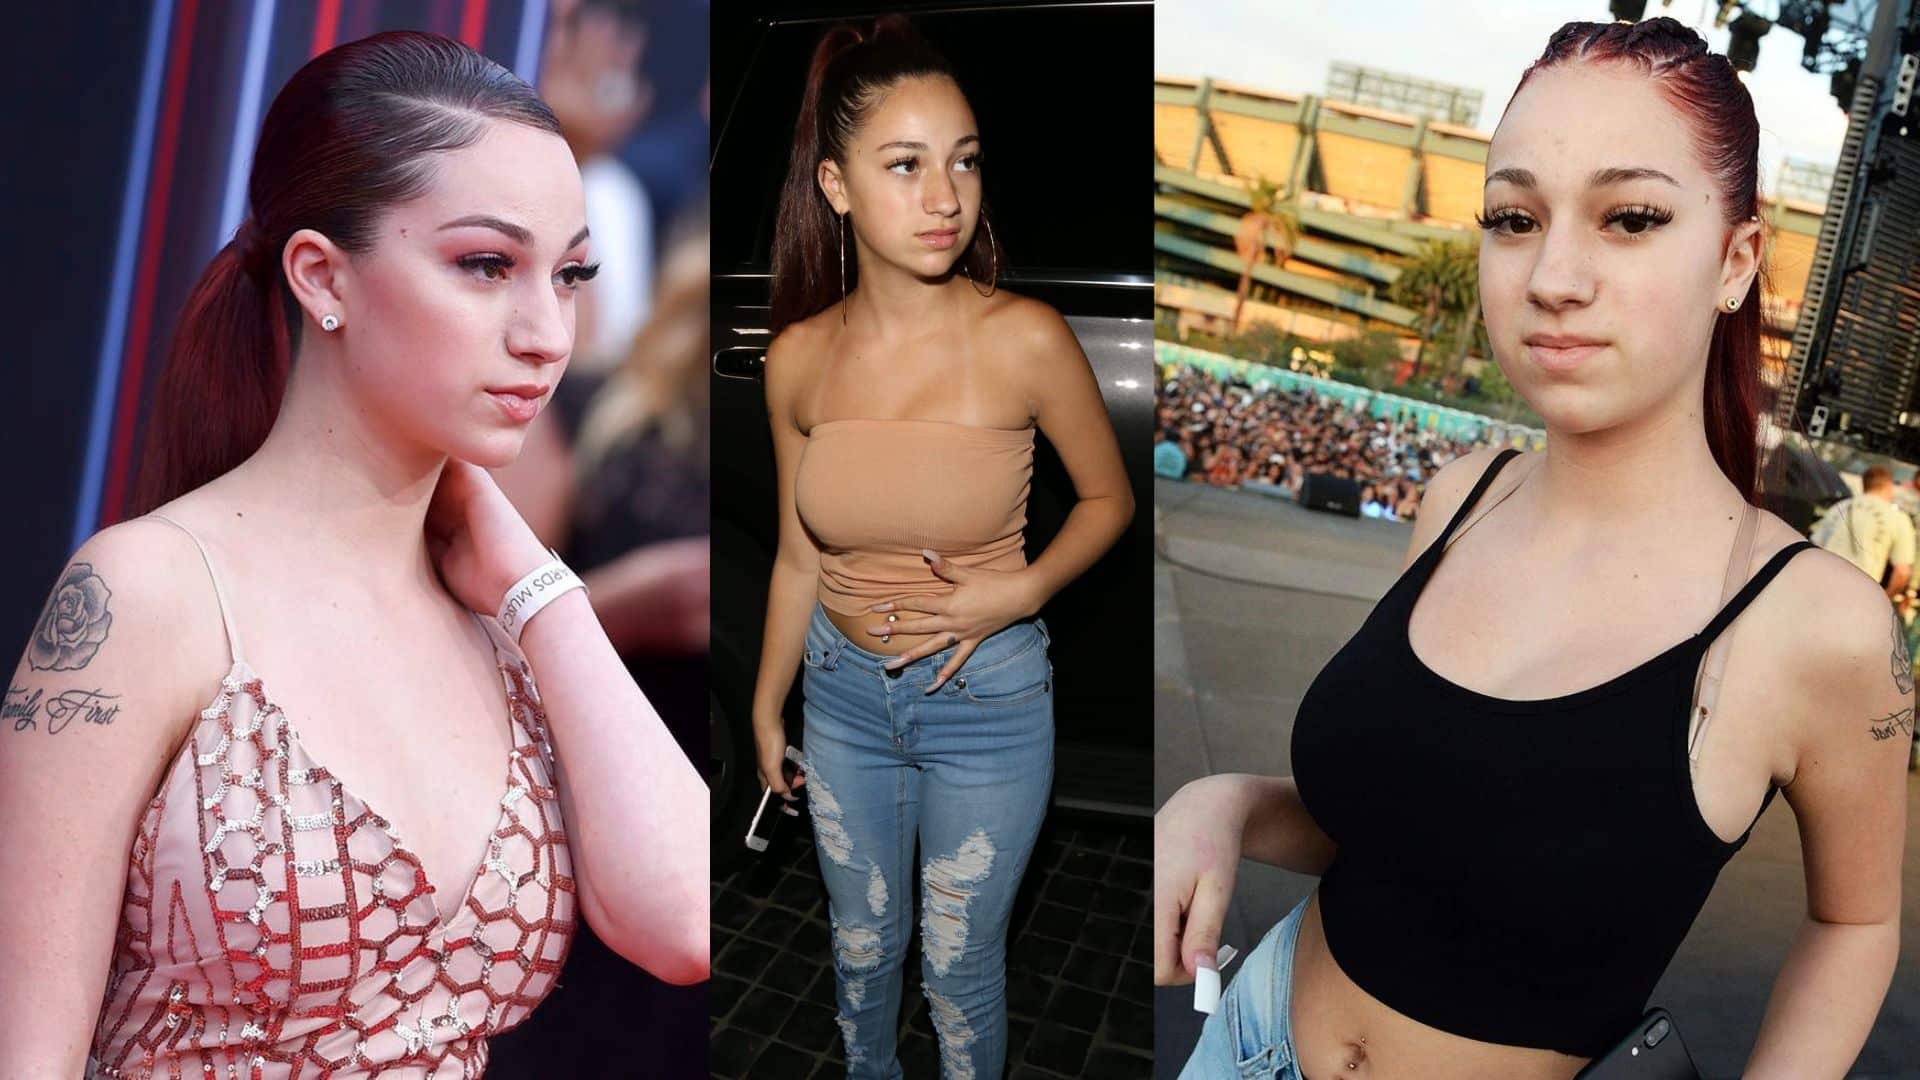 Danielle Bregoli Hottest Female Rappers in the World